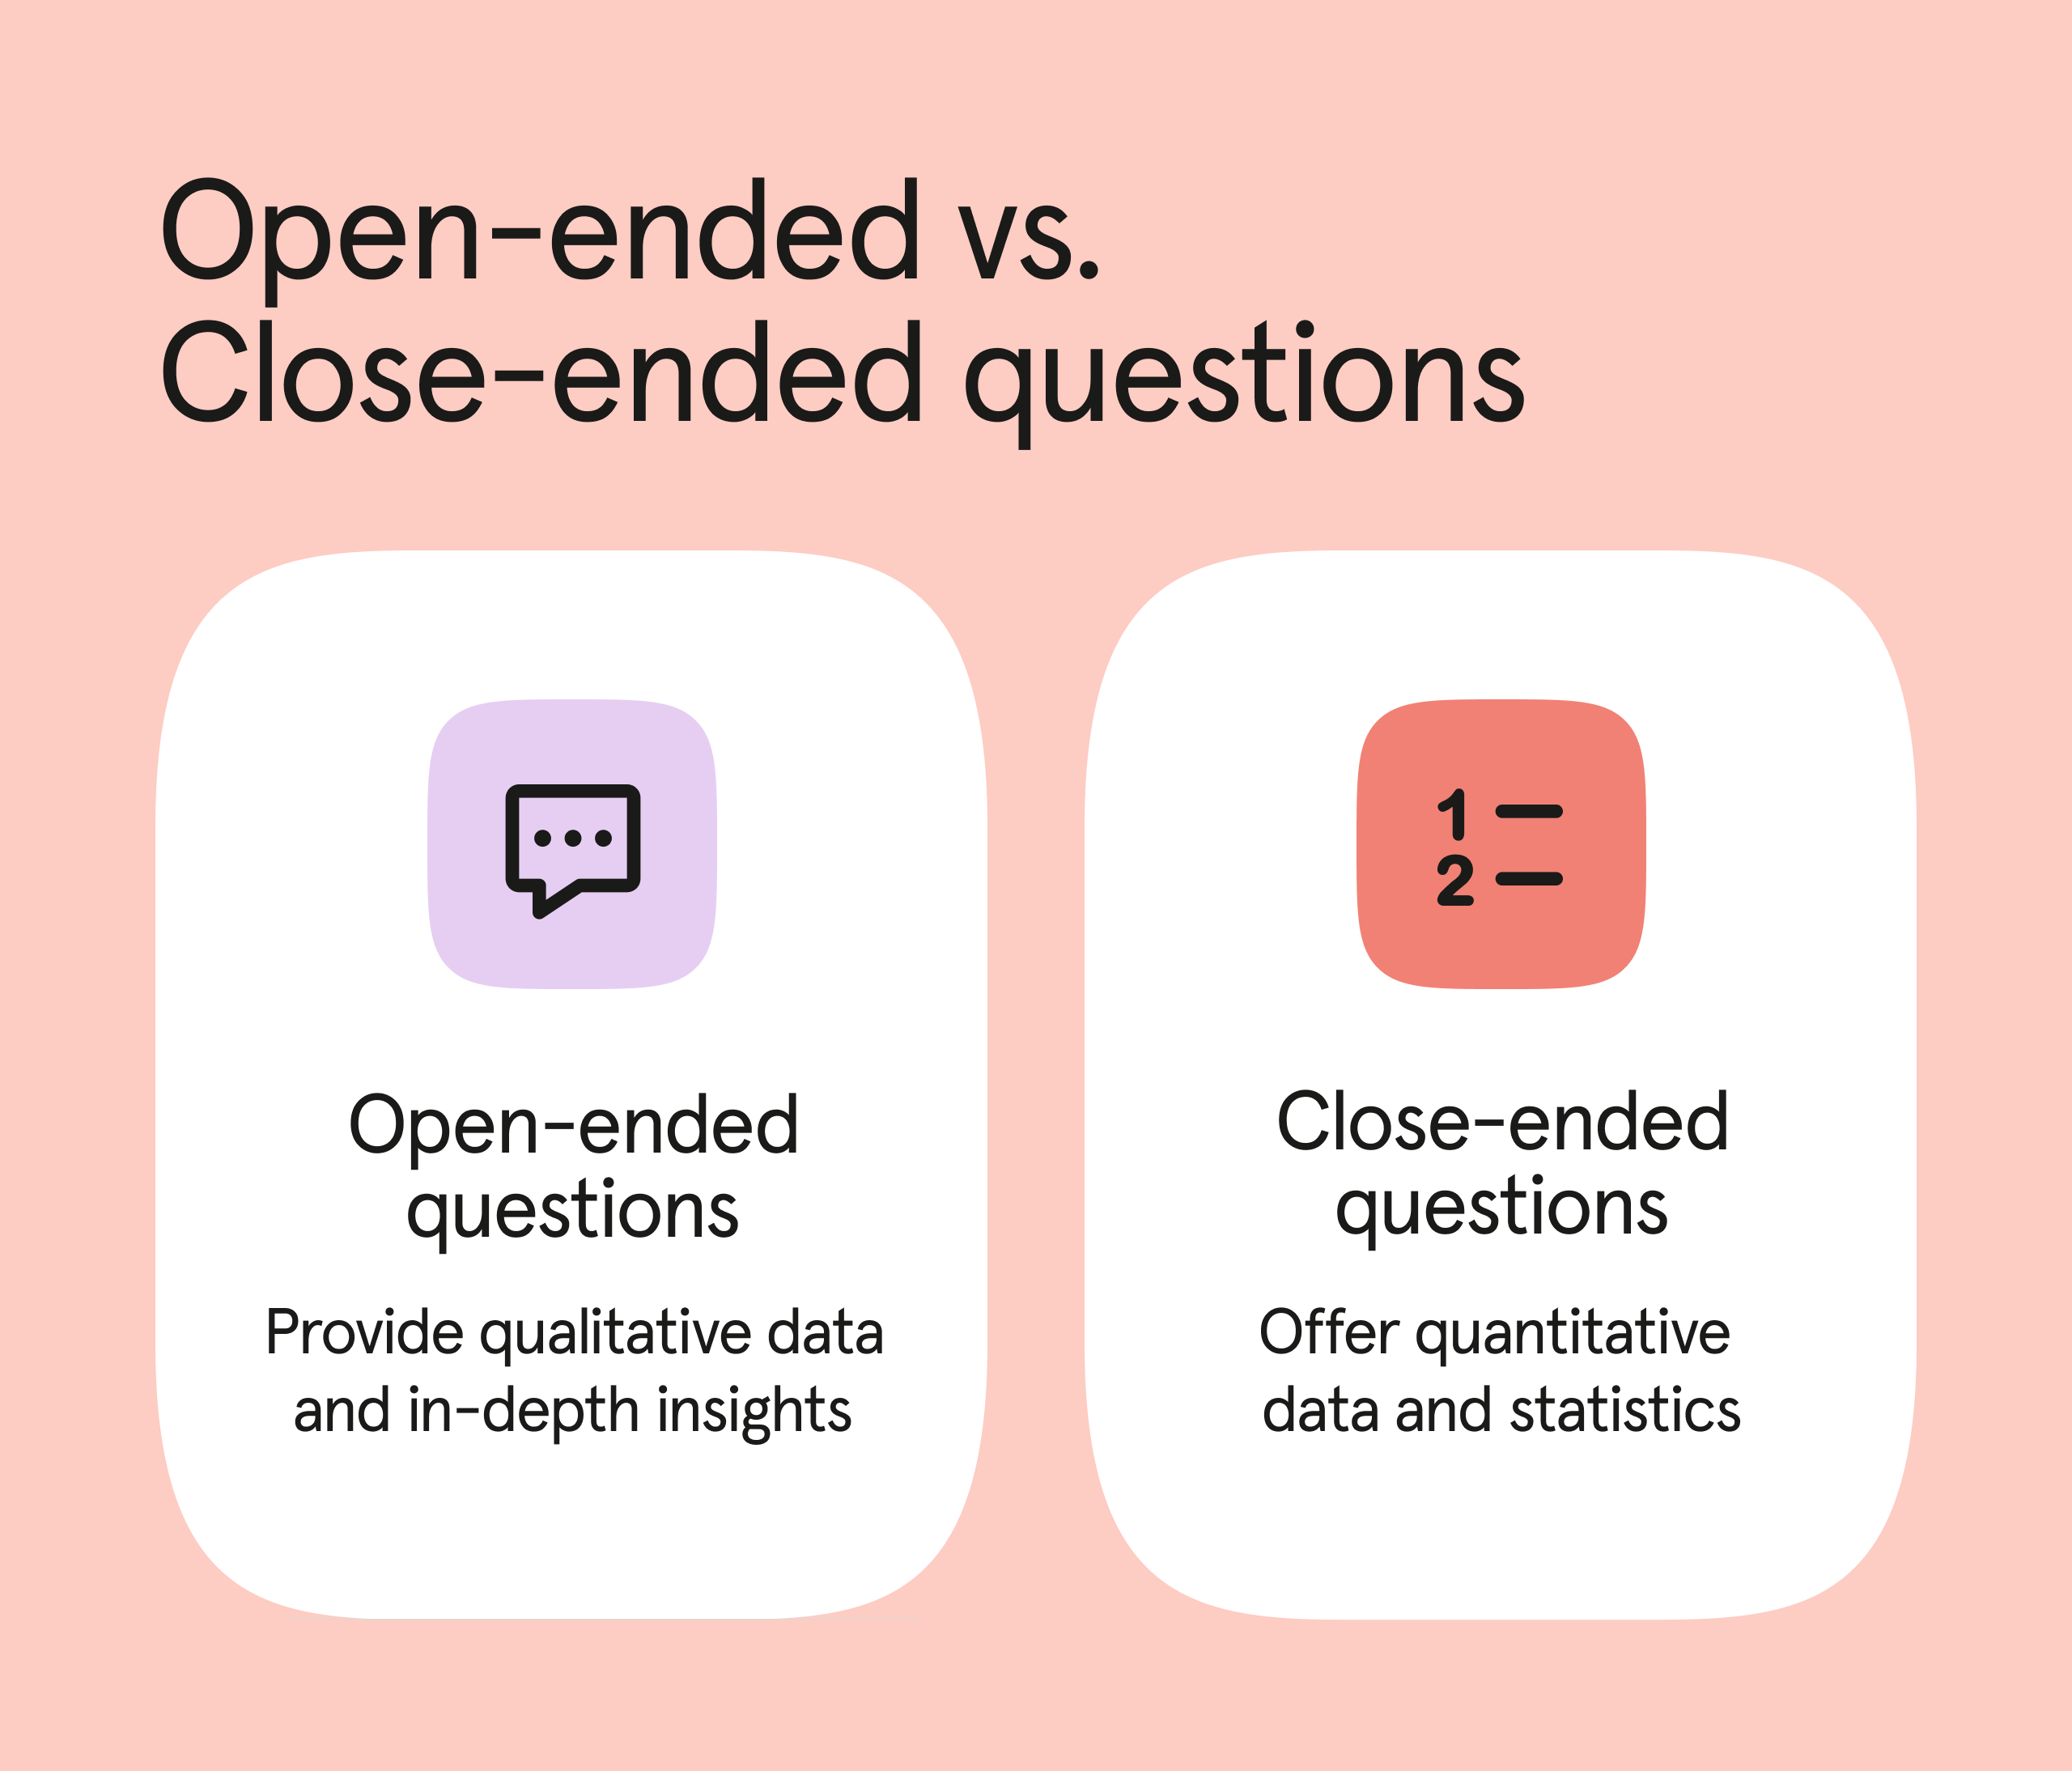 Difference between what type of data open-eneded and close-ended questions provide. 